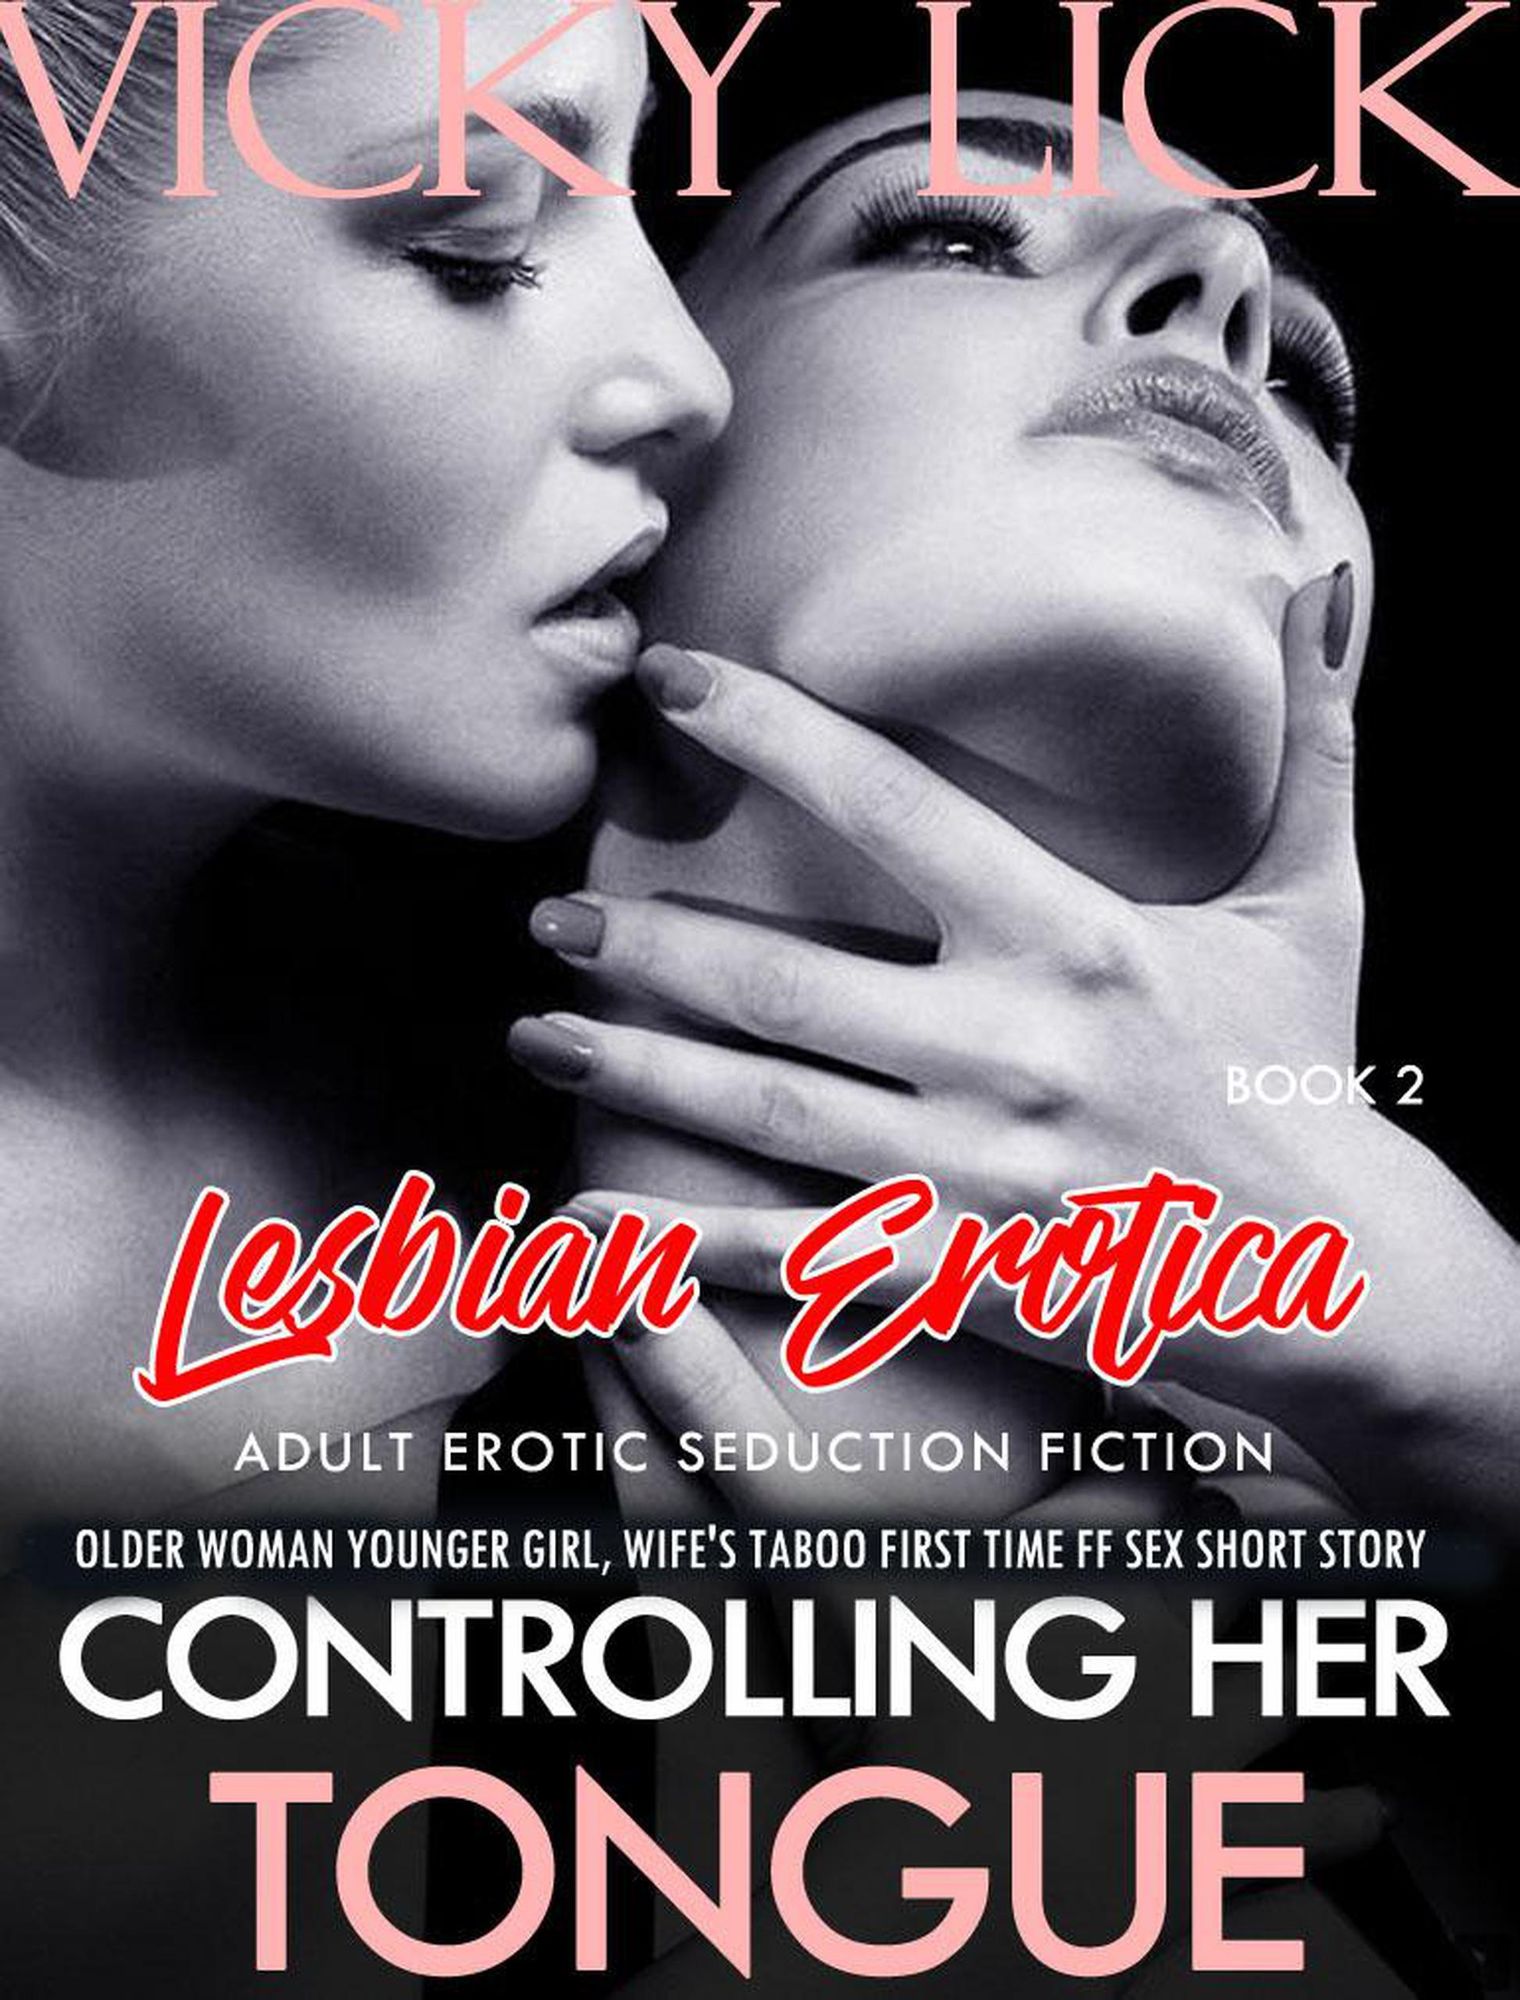 Lesbian Erotica Controlling Her Tongue - Older Woman Younger Girl, Wifes Taboo First Time FF Sex Short Story (Adult Erotic Seduction Fiction, #2) von Vicky Lick